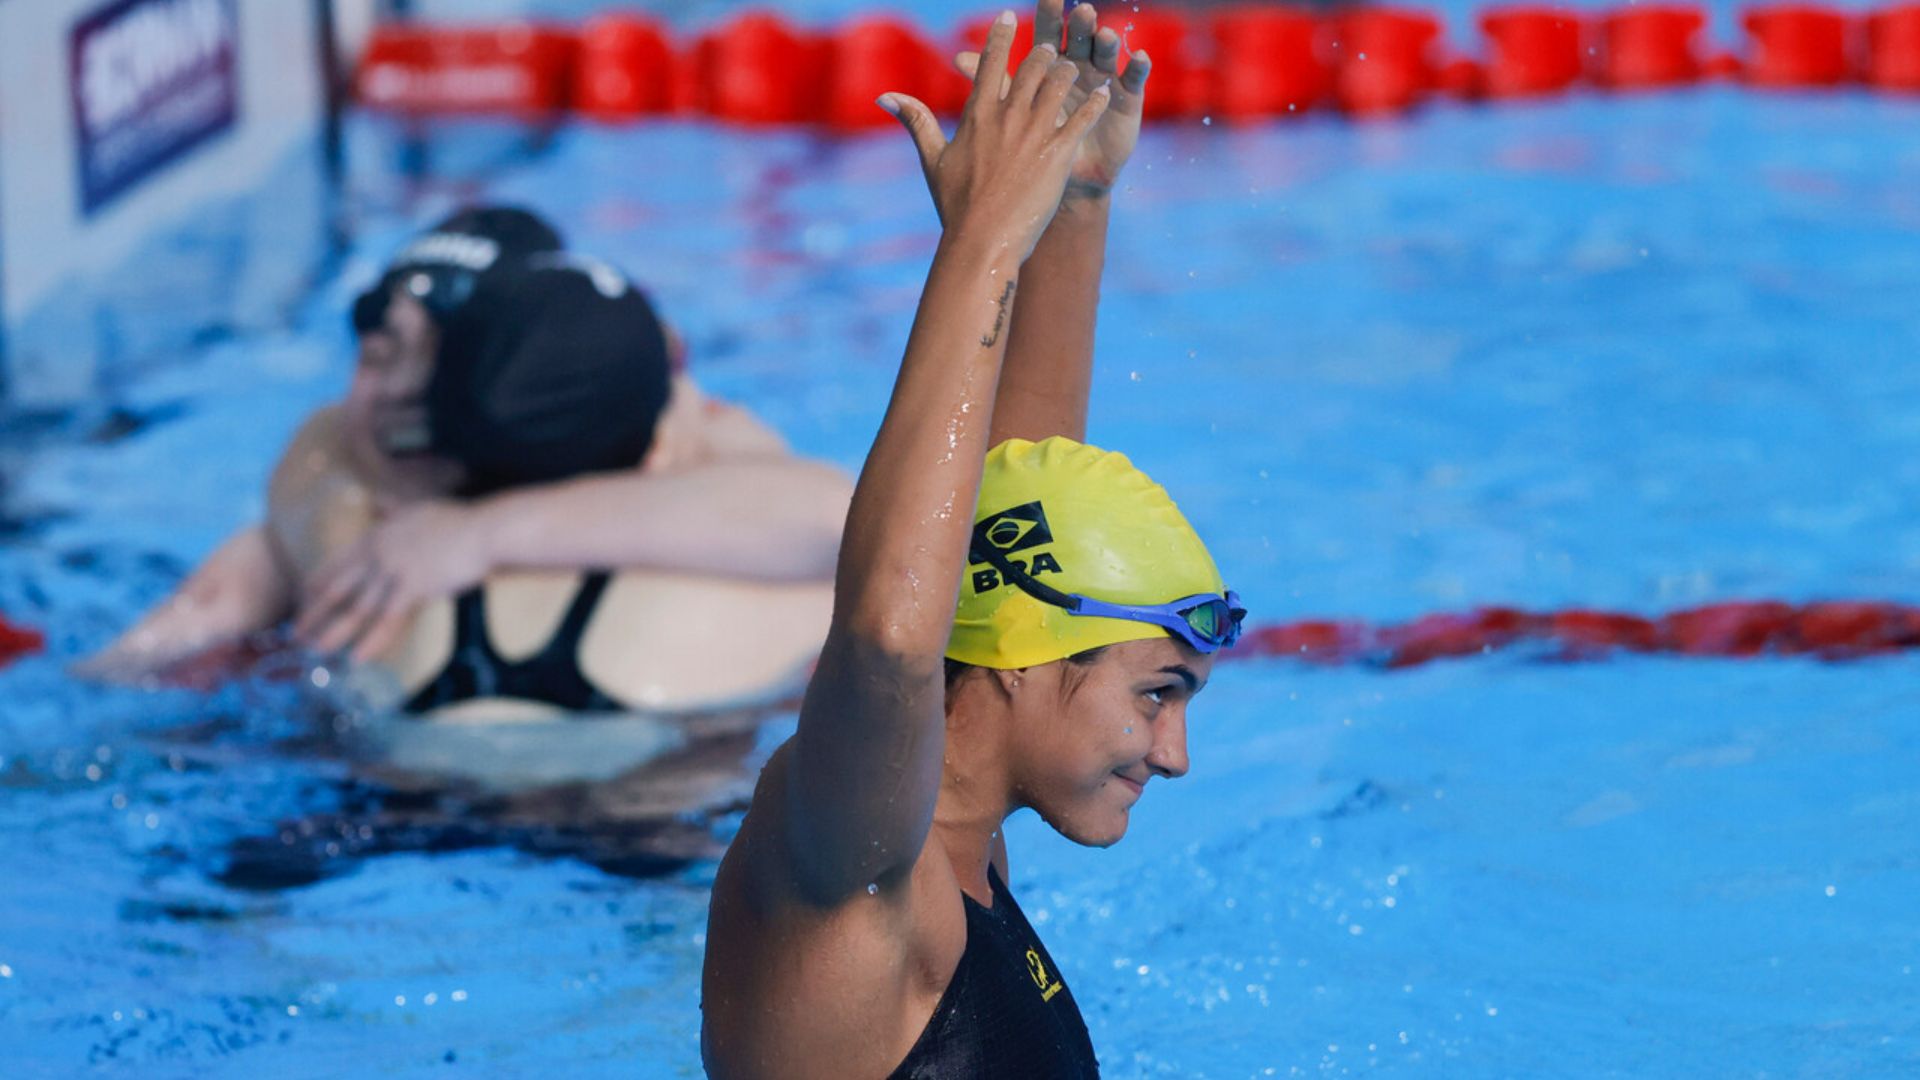 Brazil Keeps Winning Medals in Para Swimming